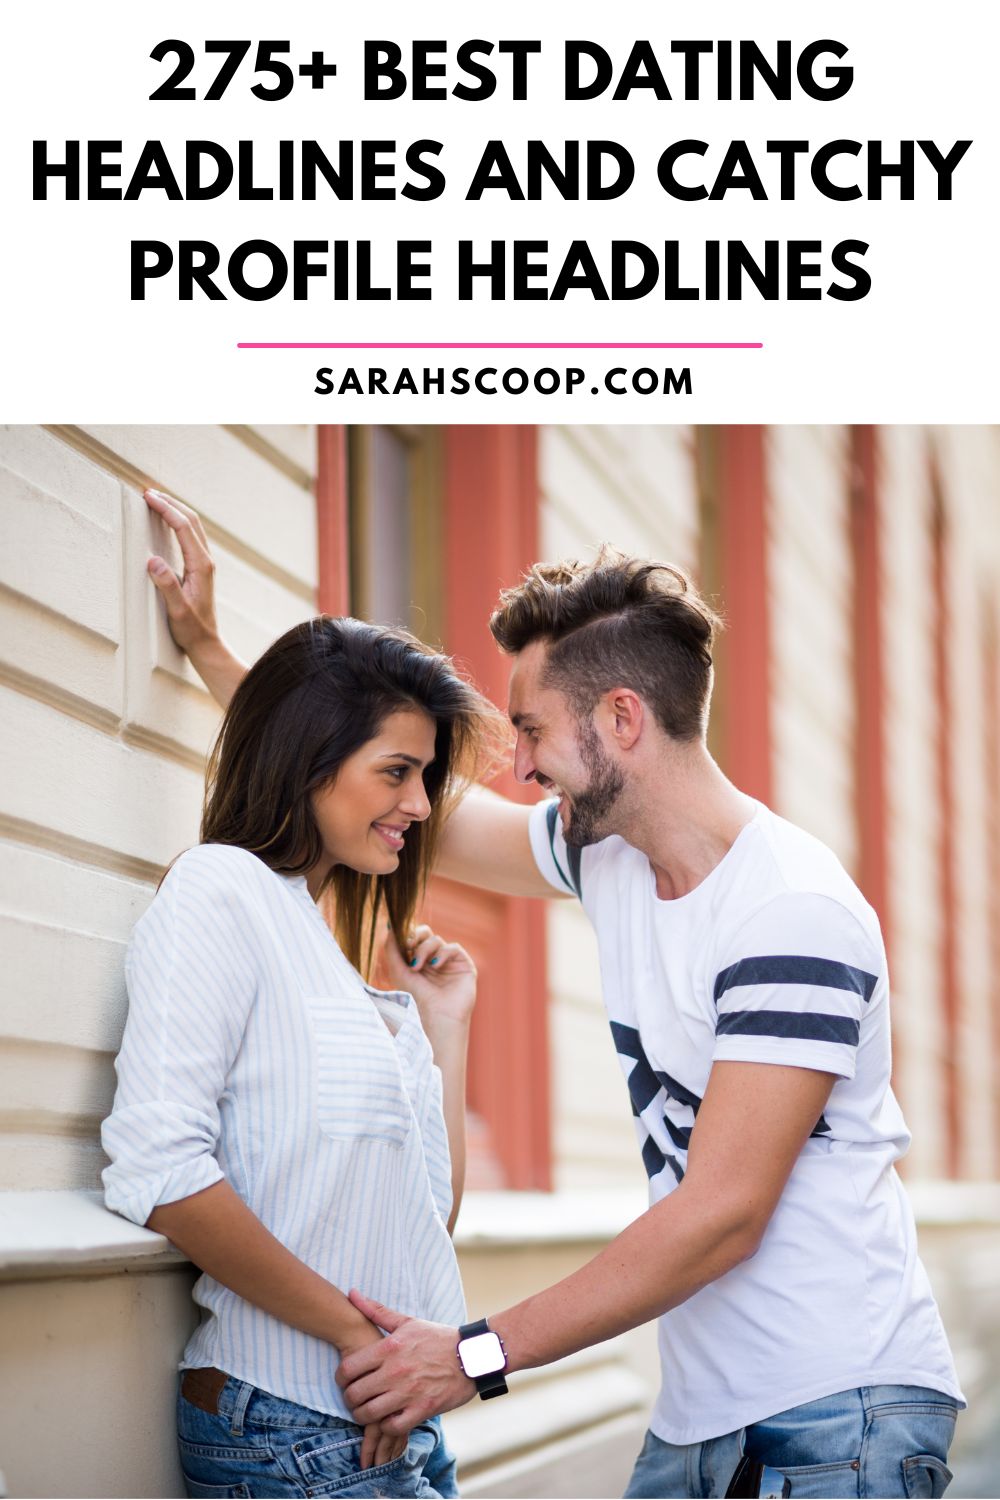 catchy funny dating headlines